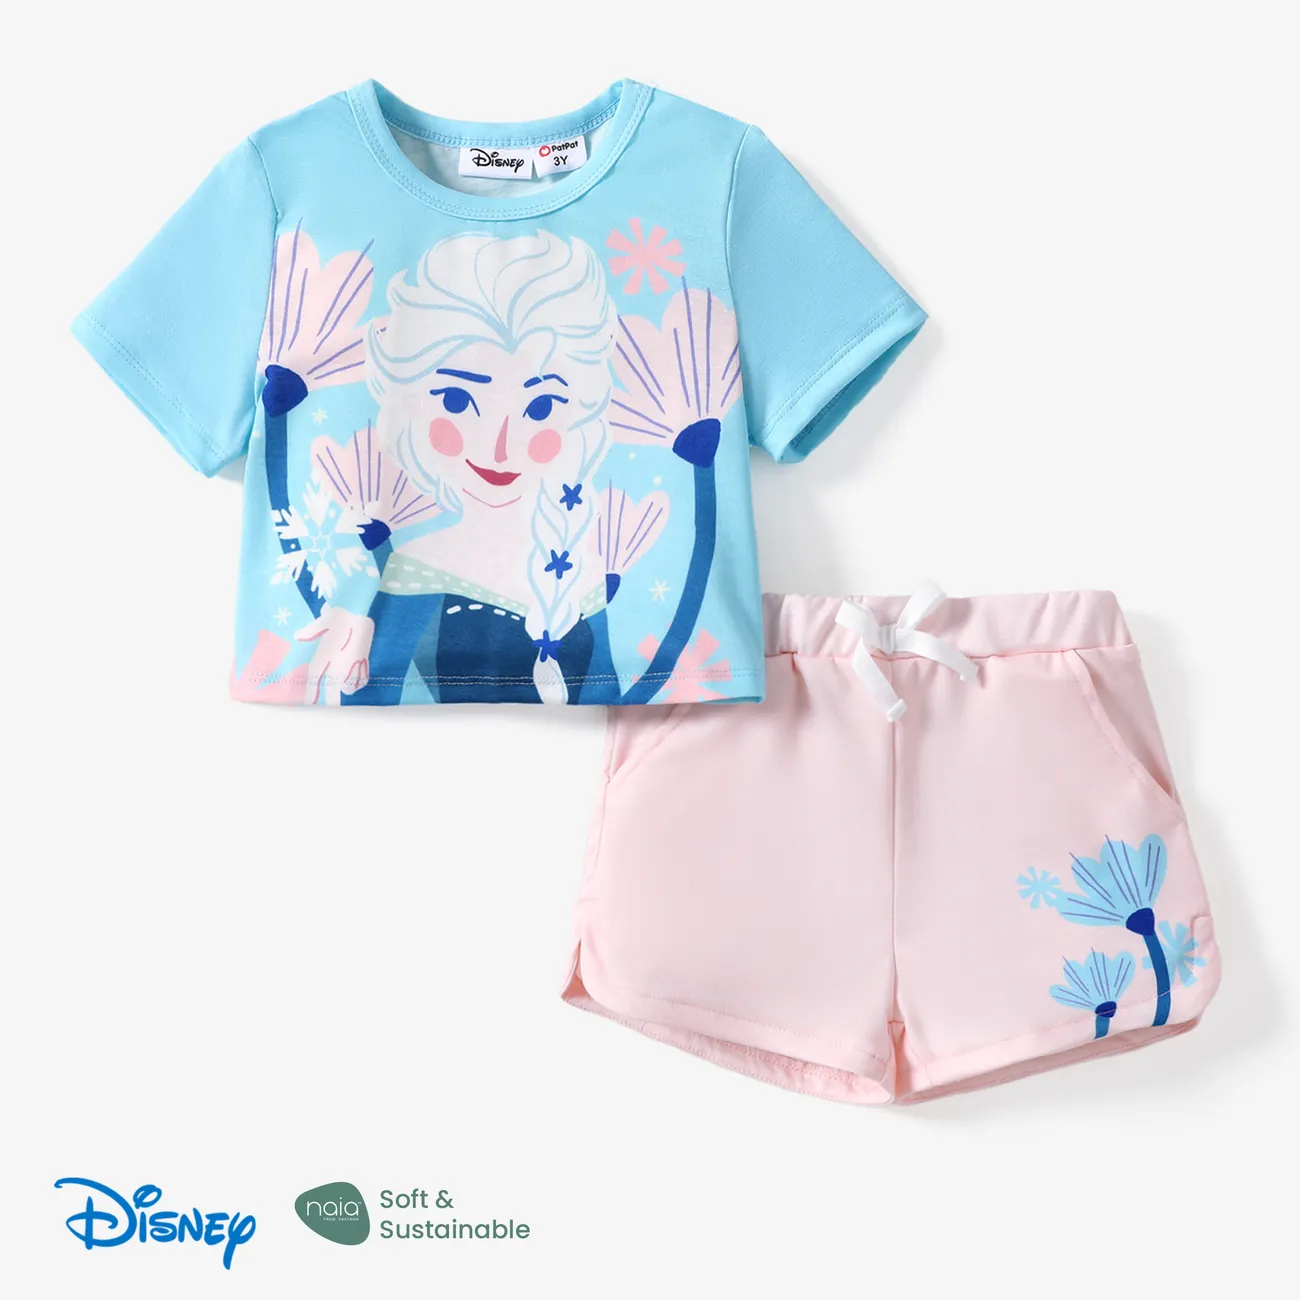 Disney Frozen Toddler Girls Elsa/Anna 1pc Naia™ Character Floral Print Tee with Shorts  Sporty Set Light Blue big image 1